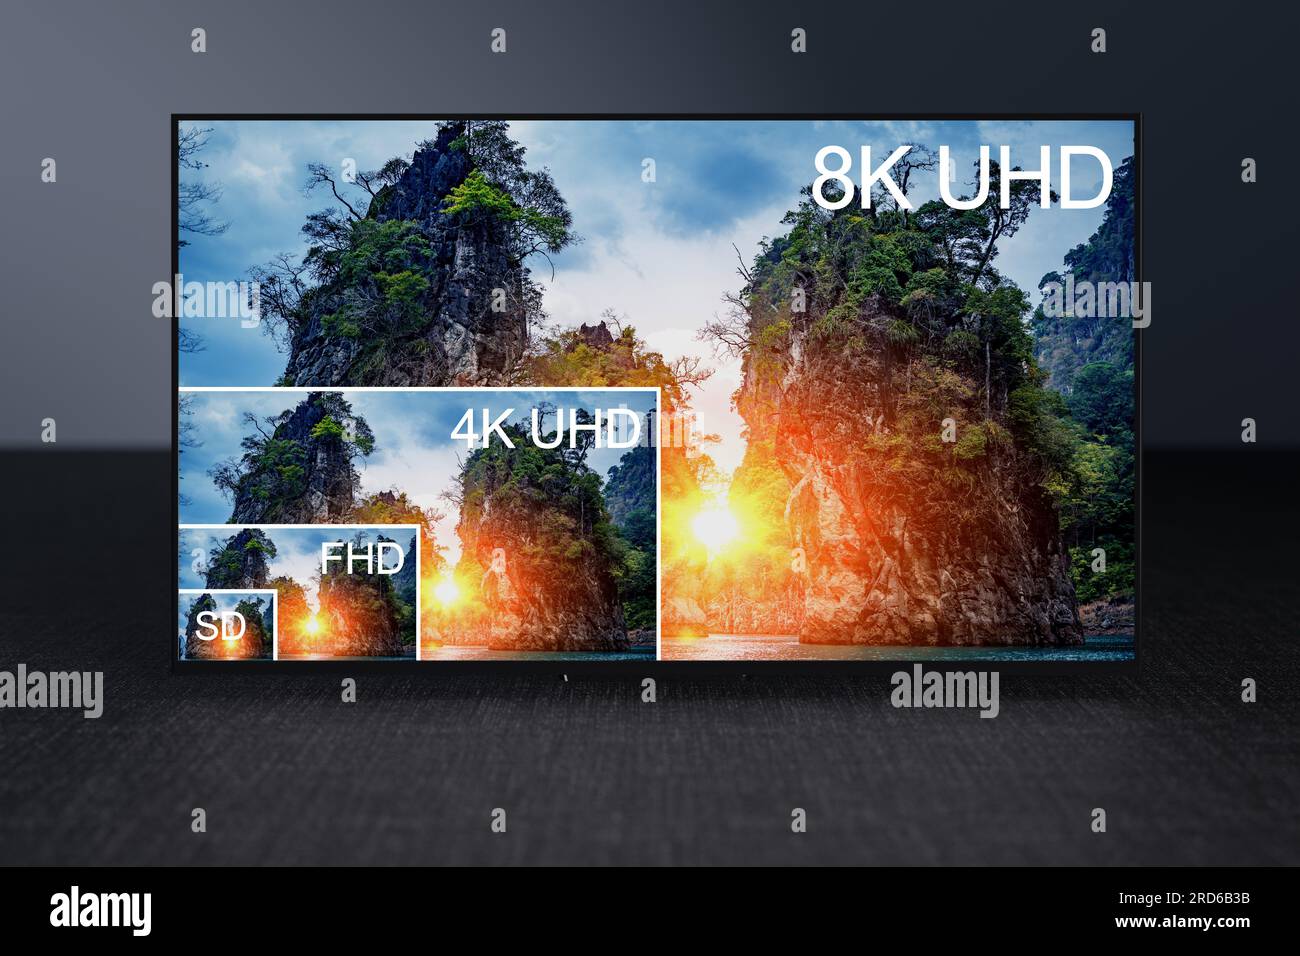 Visual comparison between different TV resolution sizes. TV resolution proportional size comparison, 8K ultra HD, 4K, Full HD and Standard definition. Stock Photo